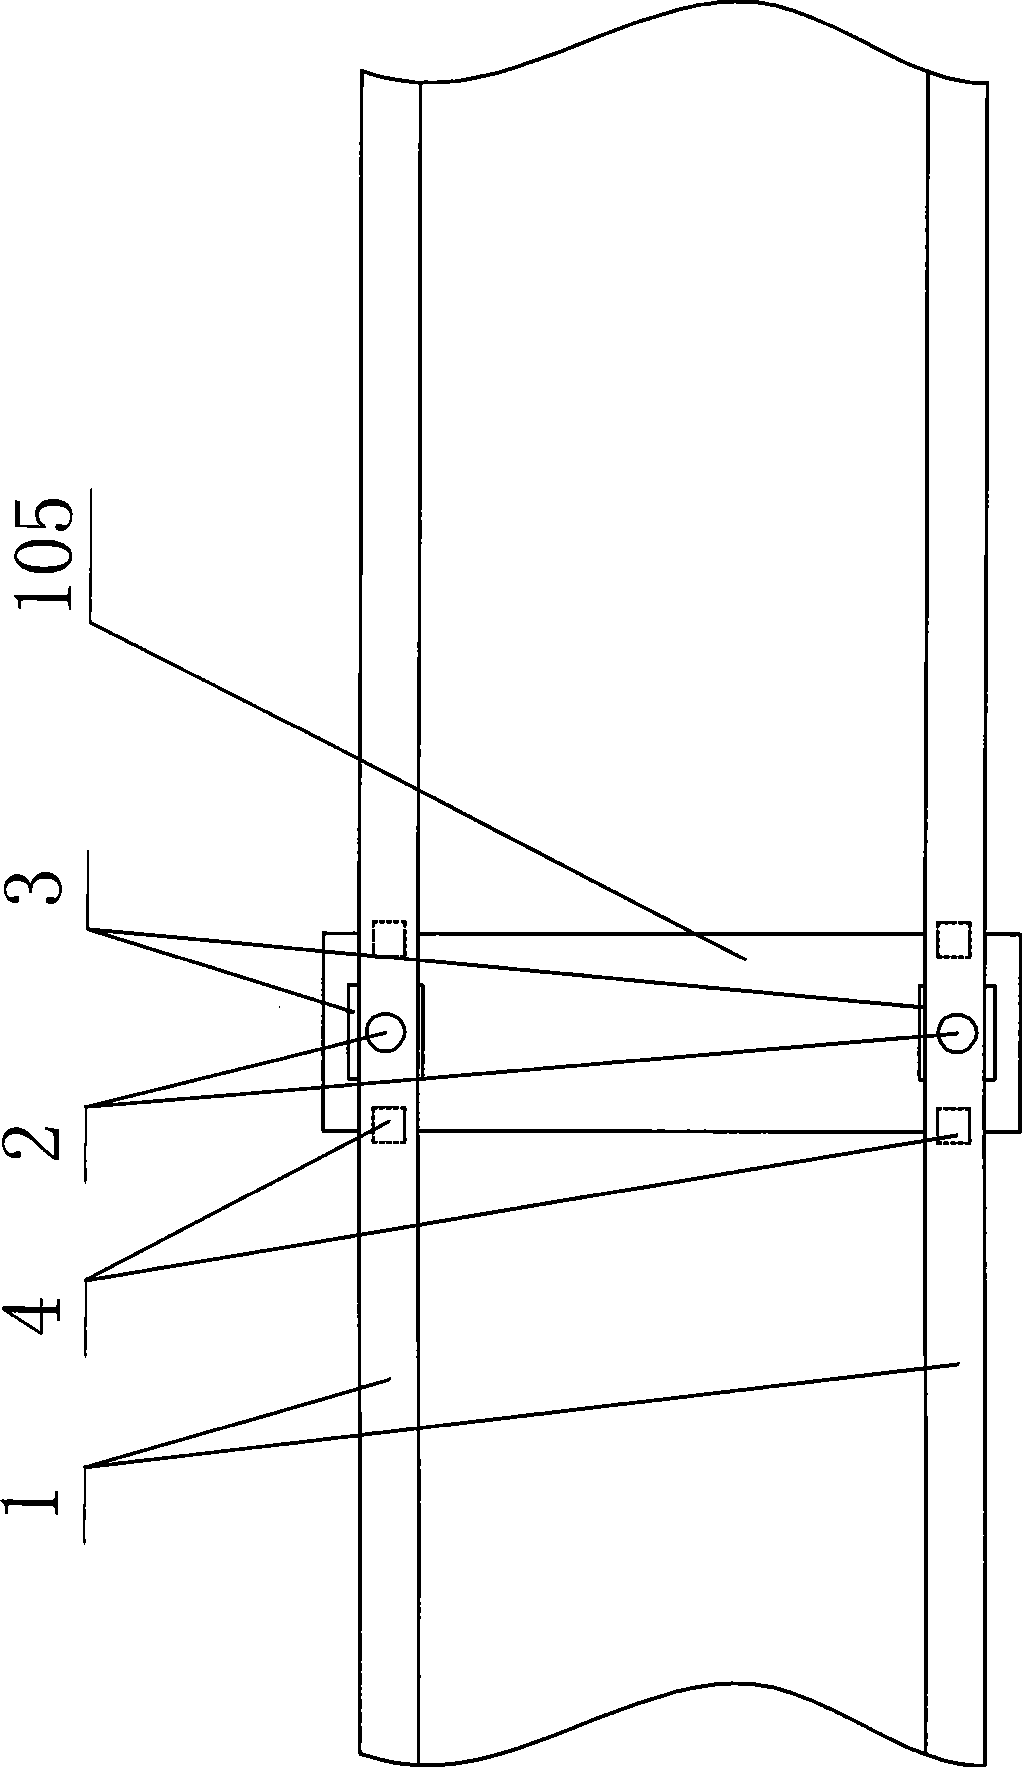 Construction method for transverse beam hoisting in-position of arch first and beam late tied-arch bridge